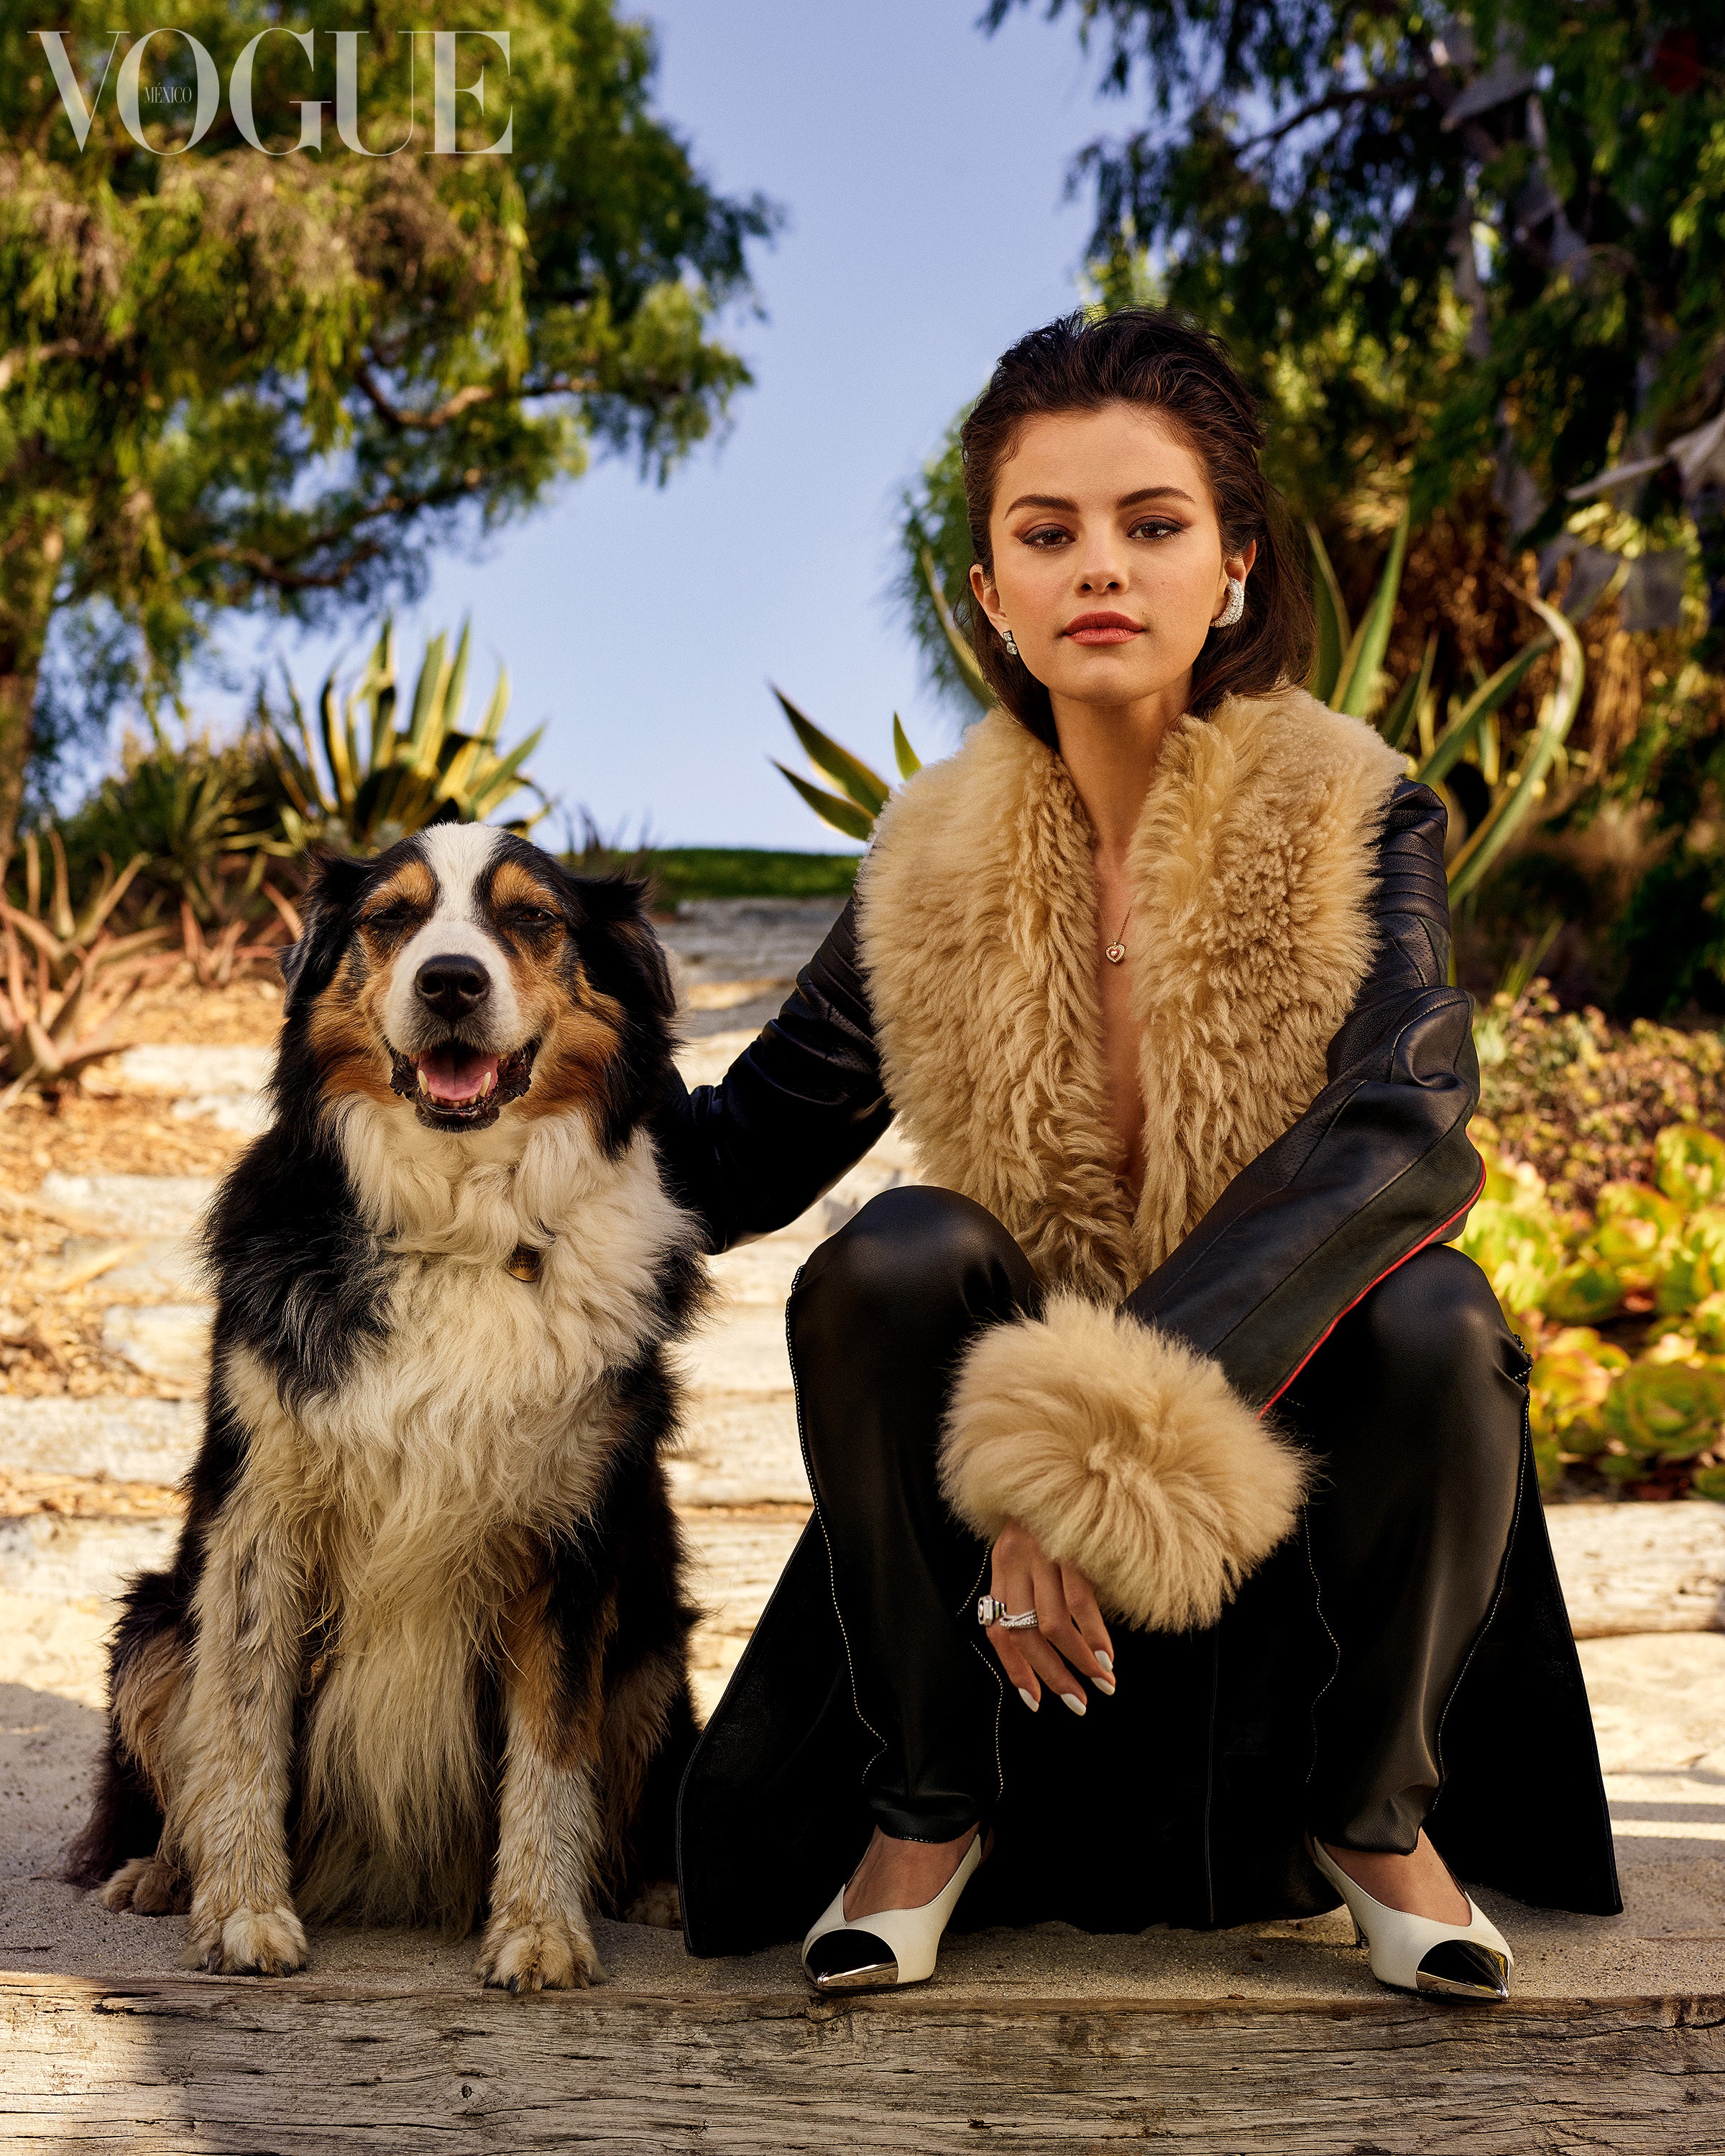 Selena Gomez in Mexico with a Dog!